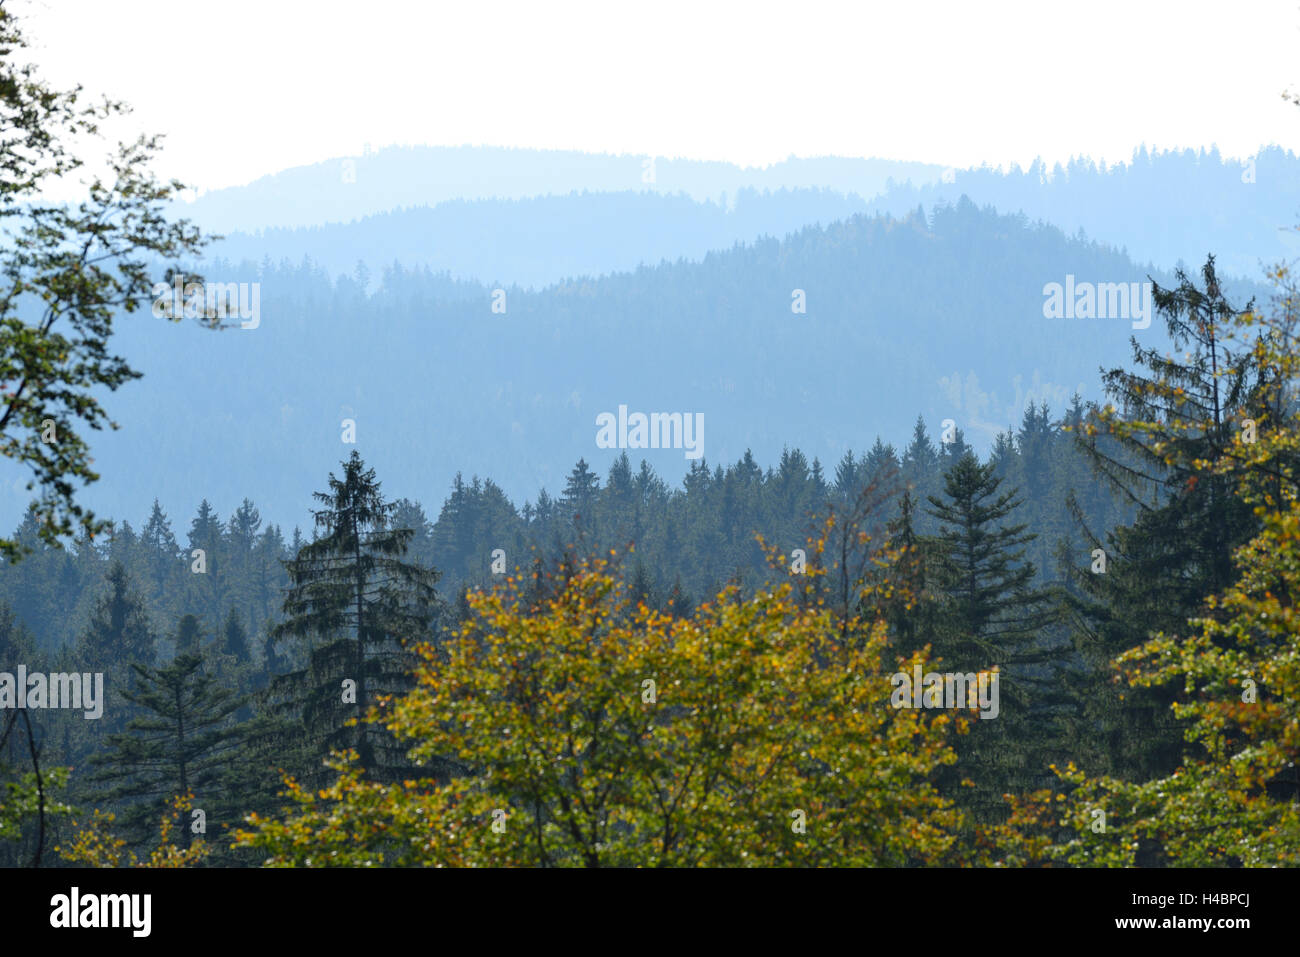 Landscape, mixed forest, tree tops, fog Stock Photo